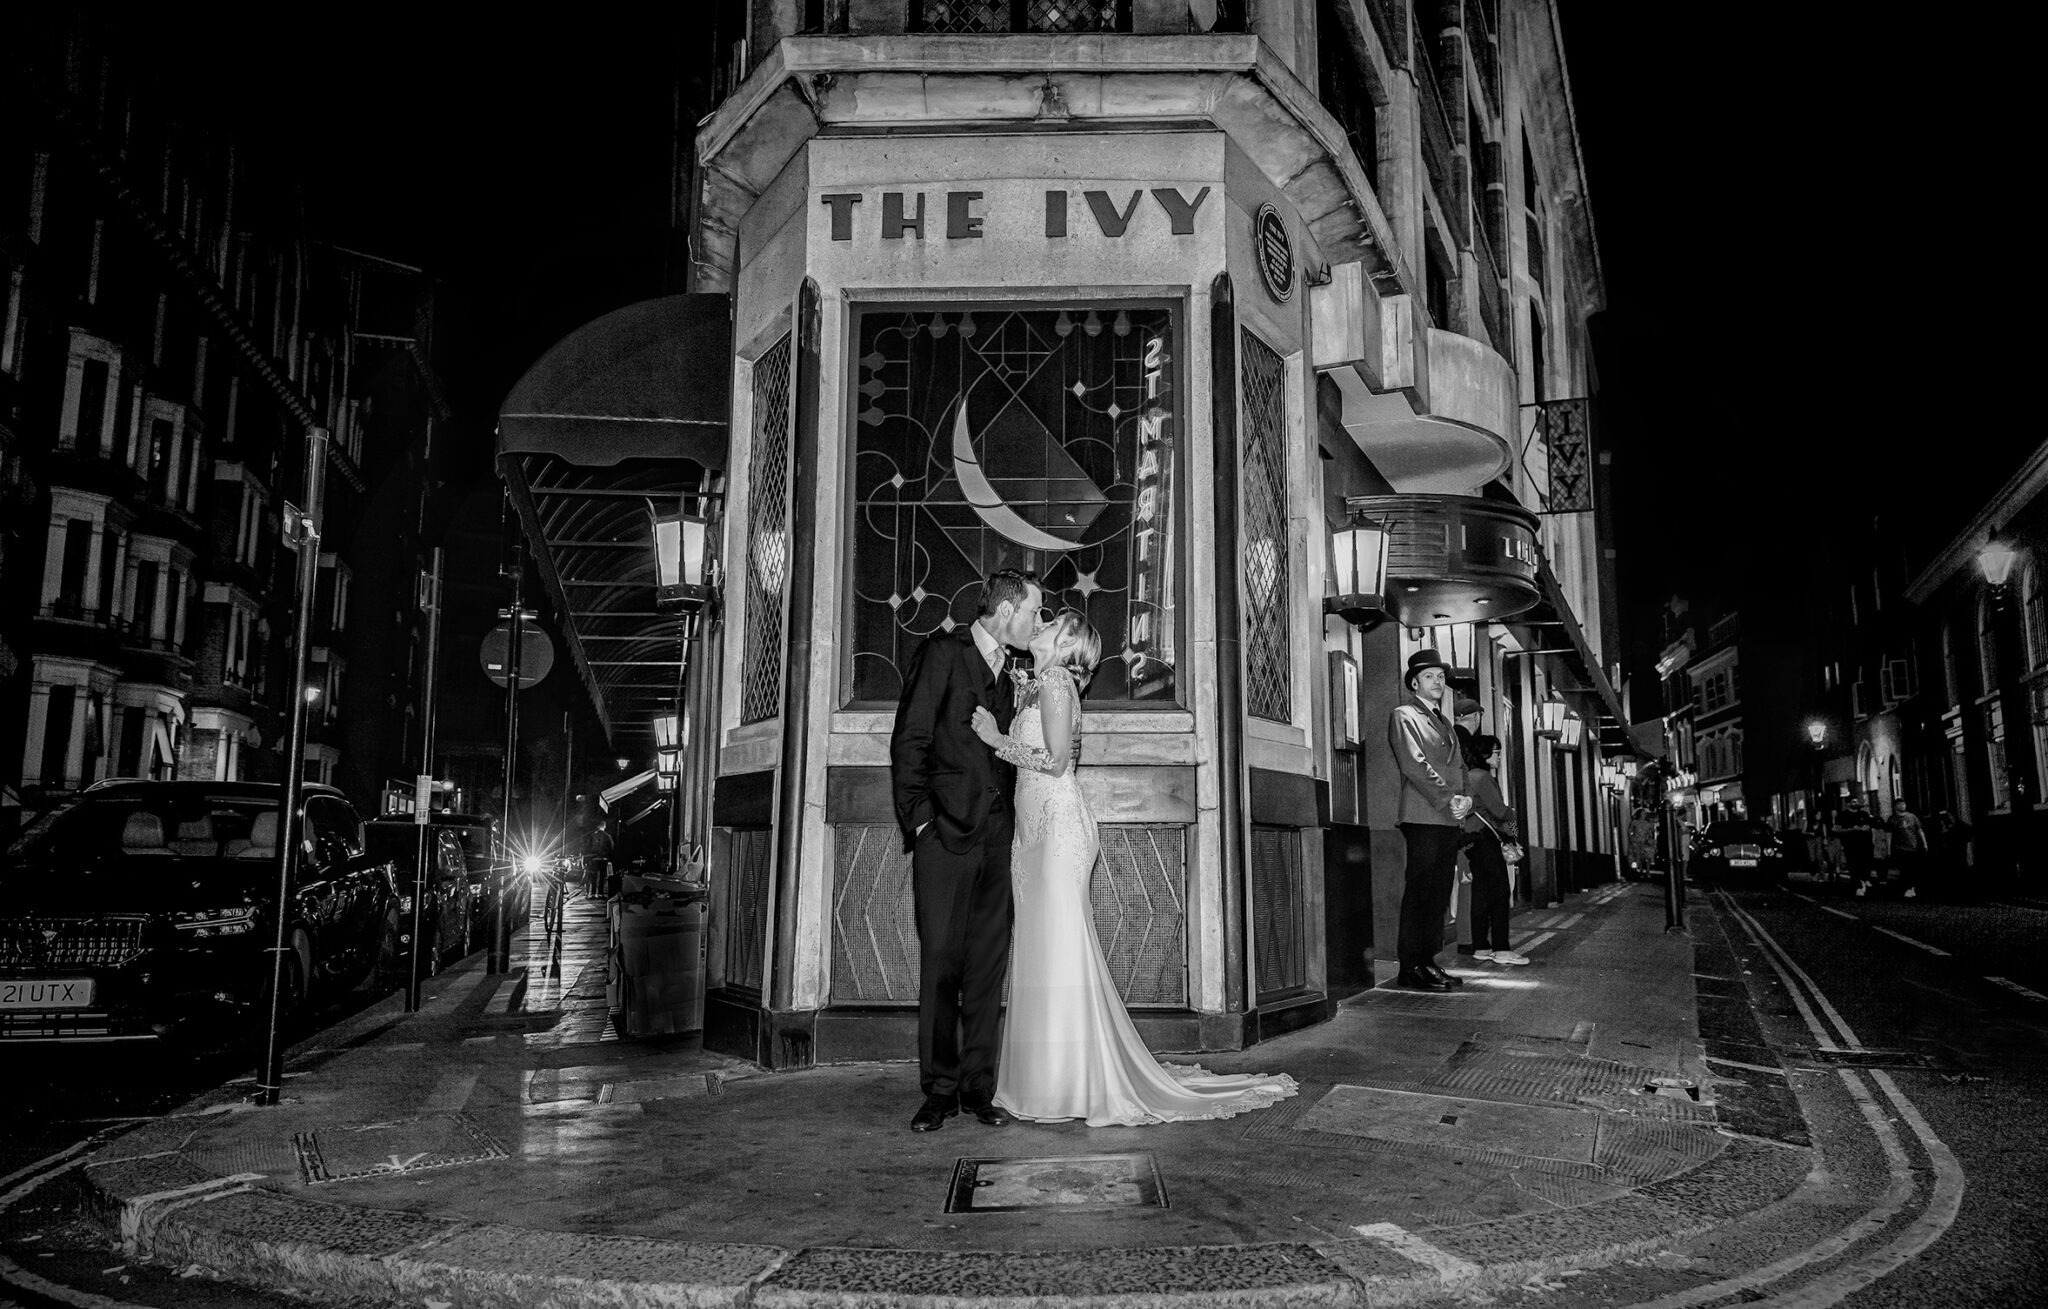 Wedding couple kiss outside The Ivy central London image